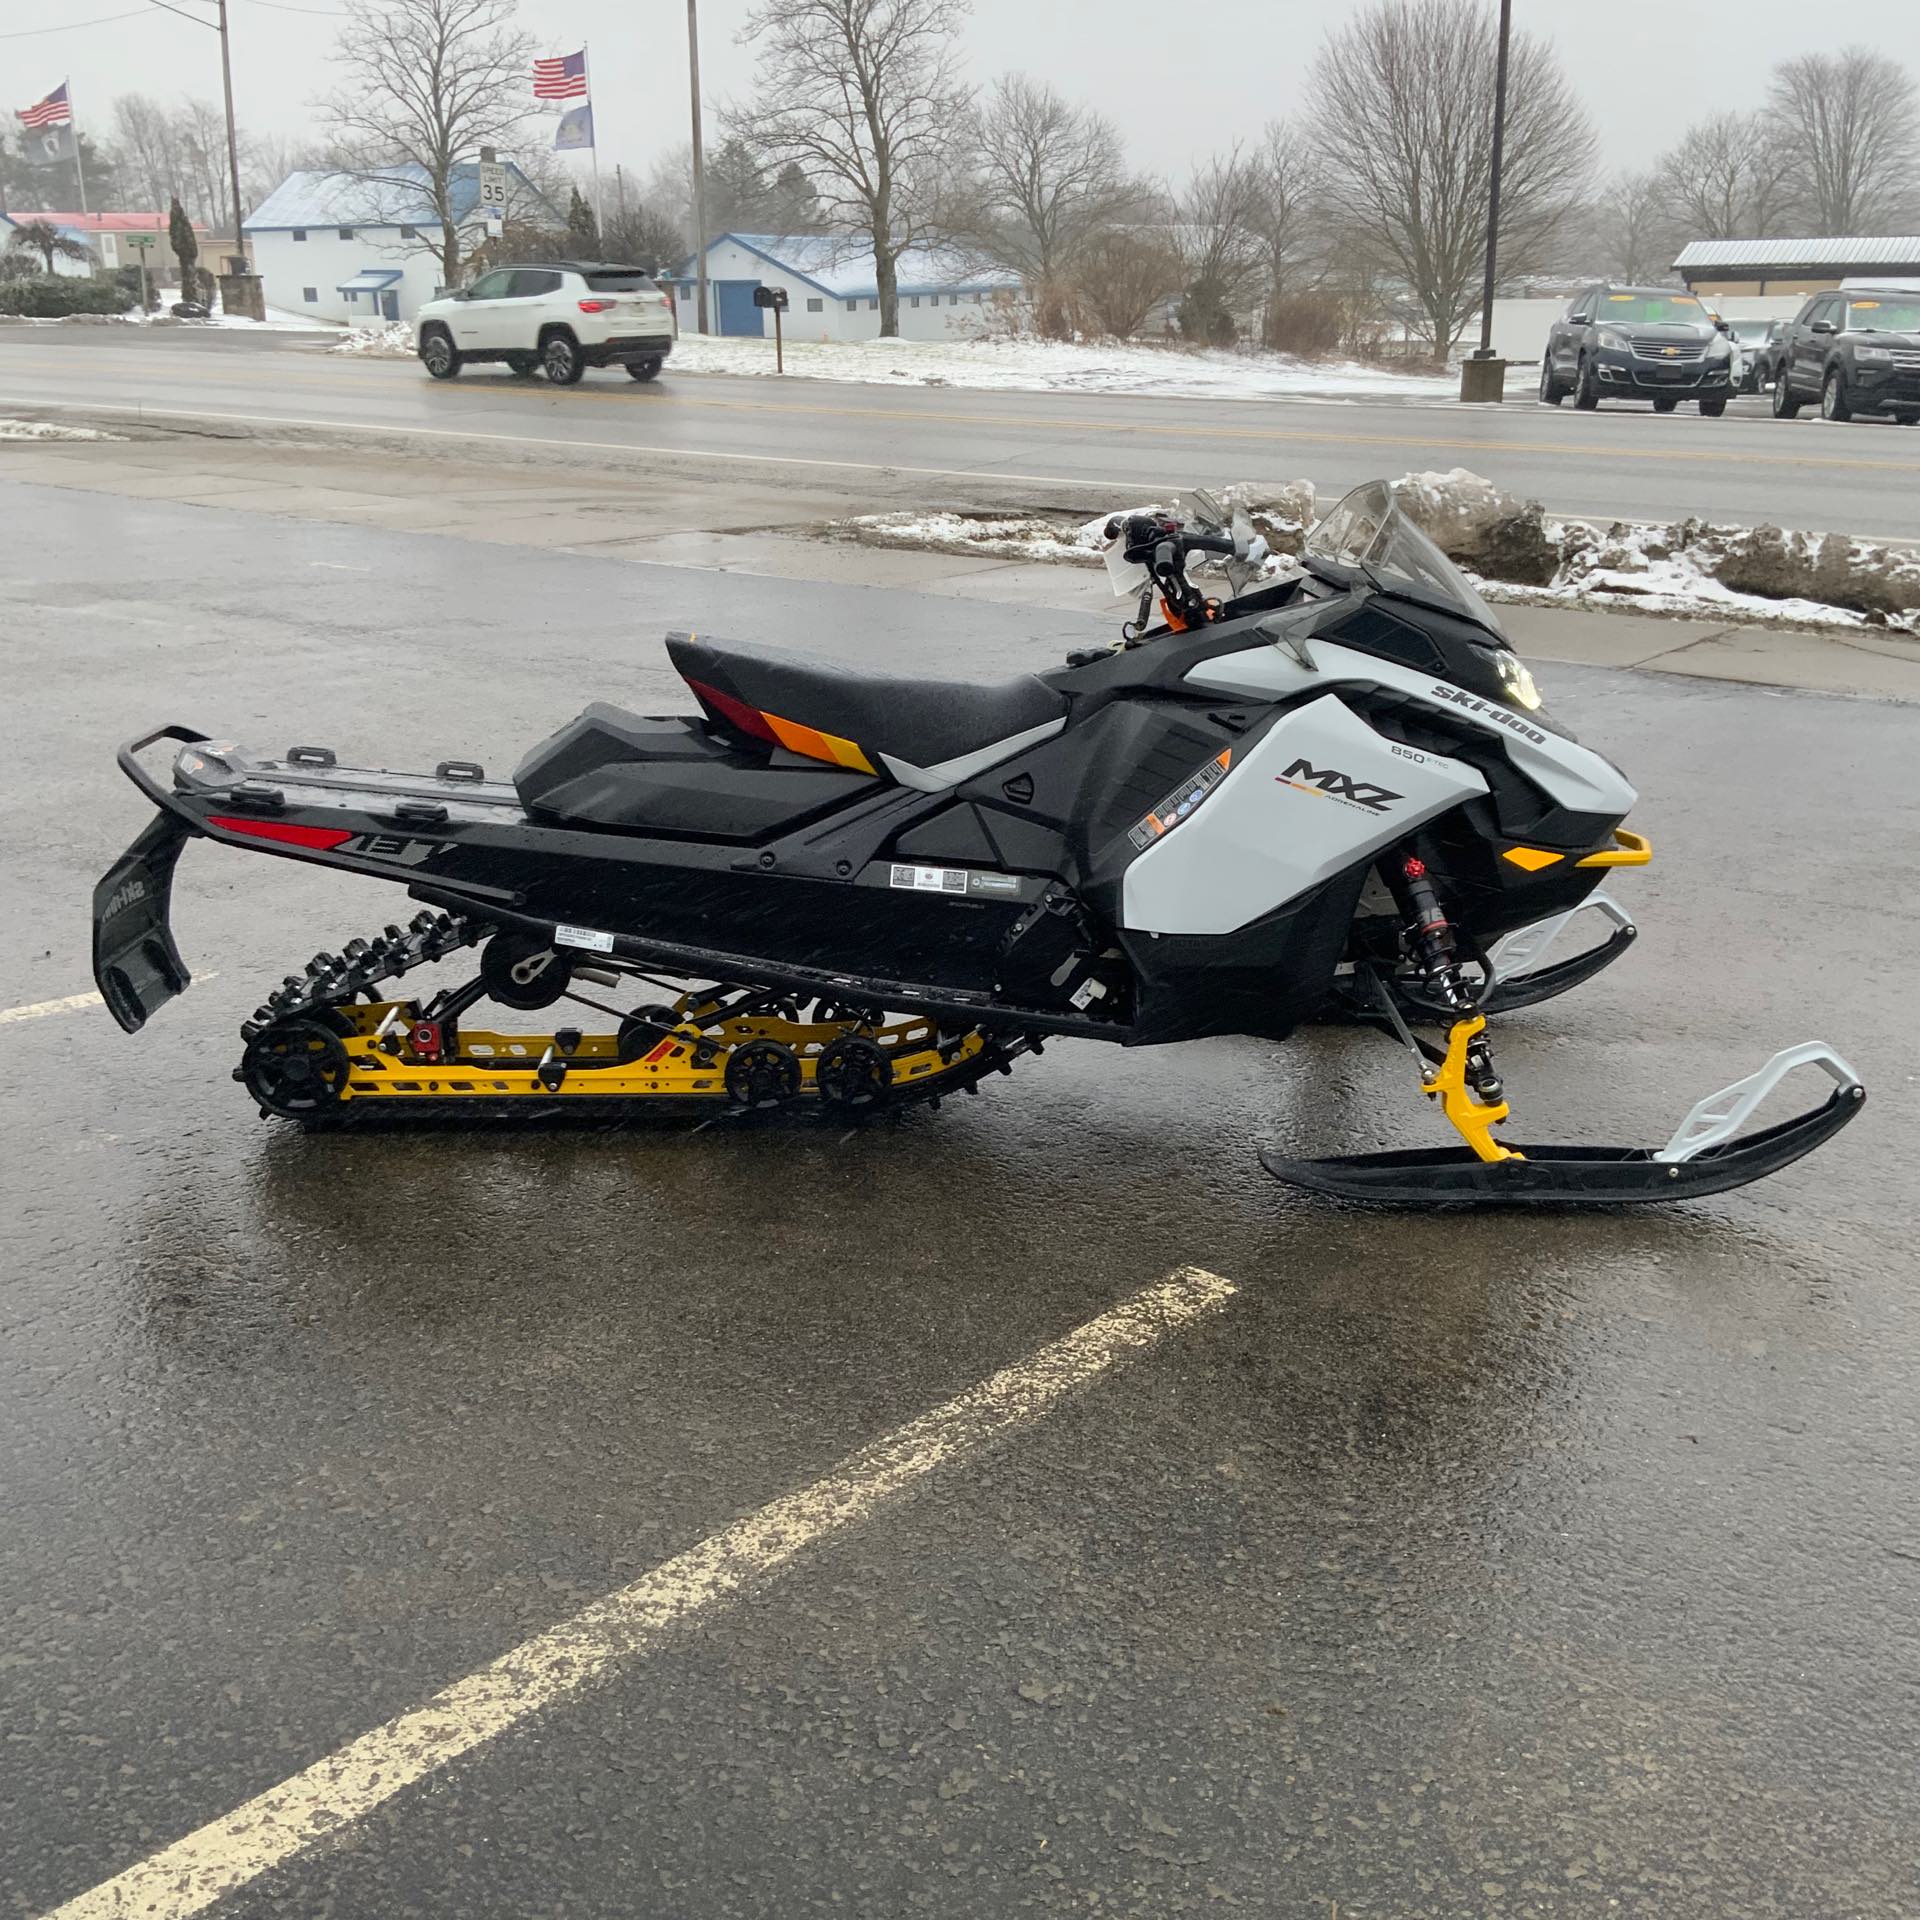 2024 Ski-Doo MXZ Adrenaline With Blizzard Package 850 E-TEC 137 15 at Leisure Time Powersports of Corry